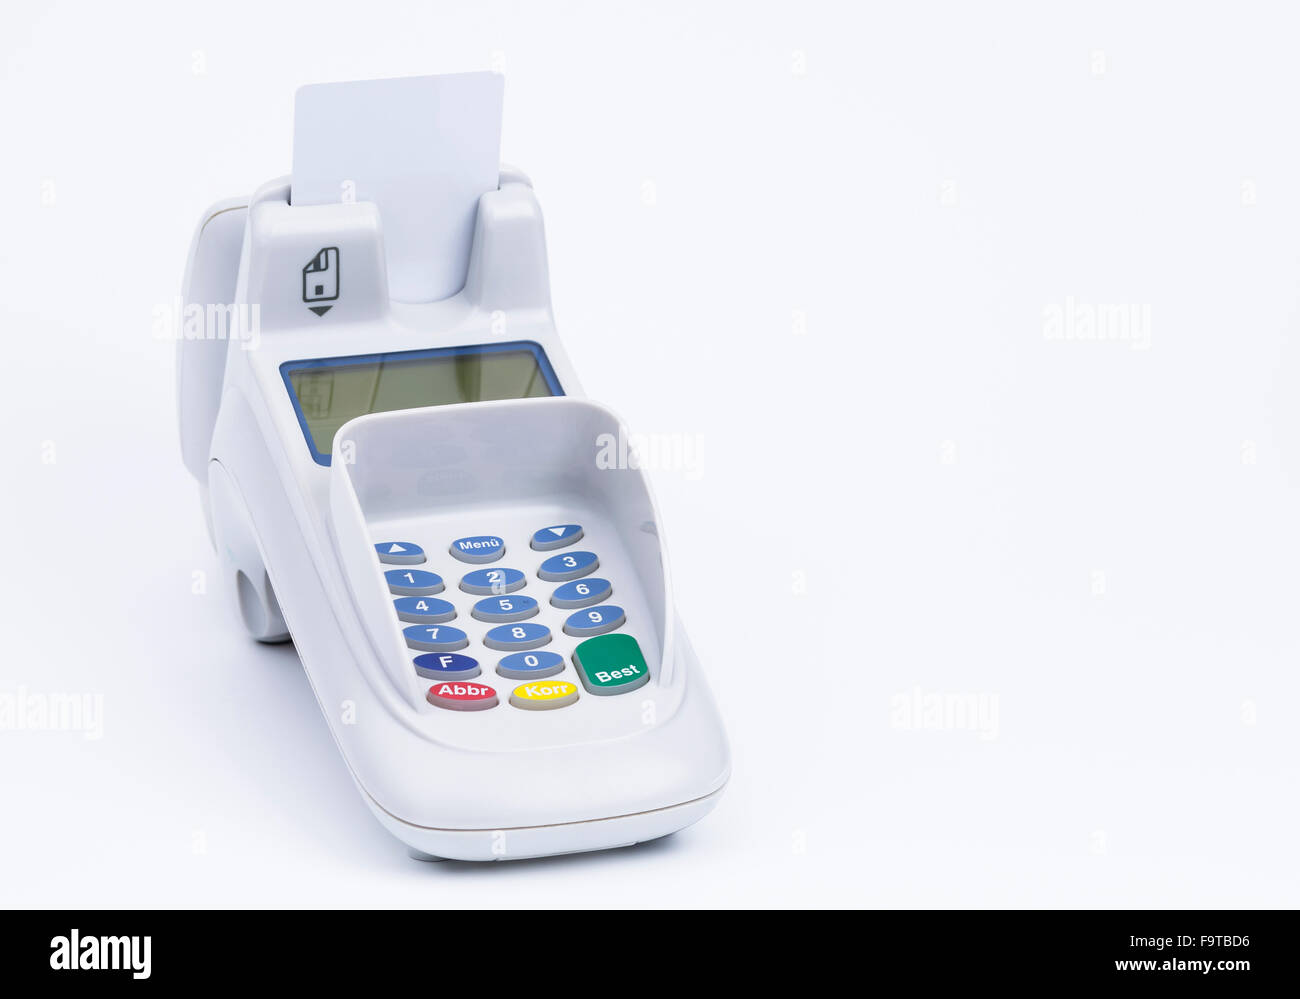 Image shows a credit card machine isolated on white Stock Photo